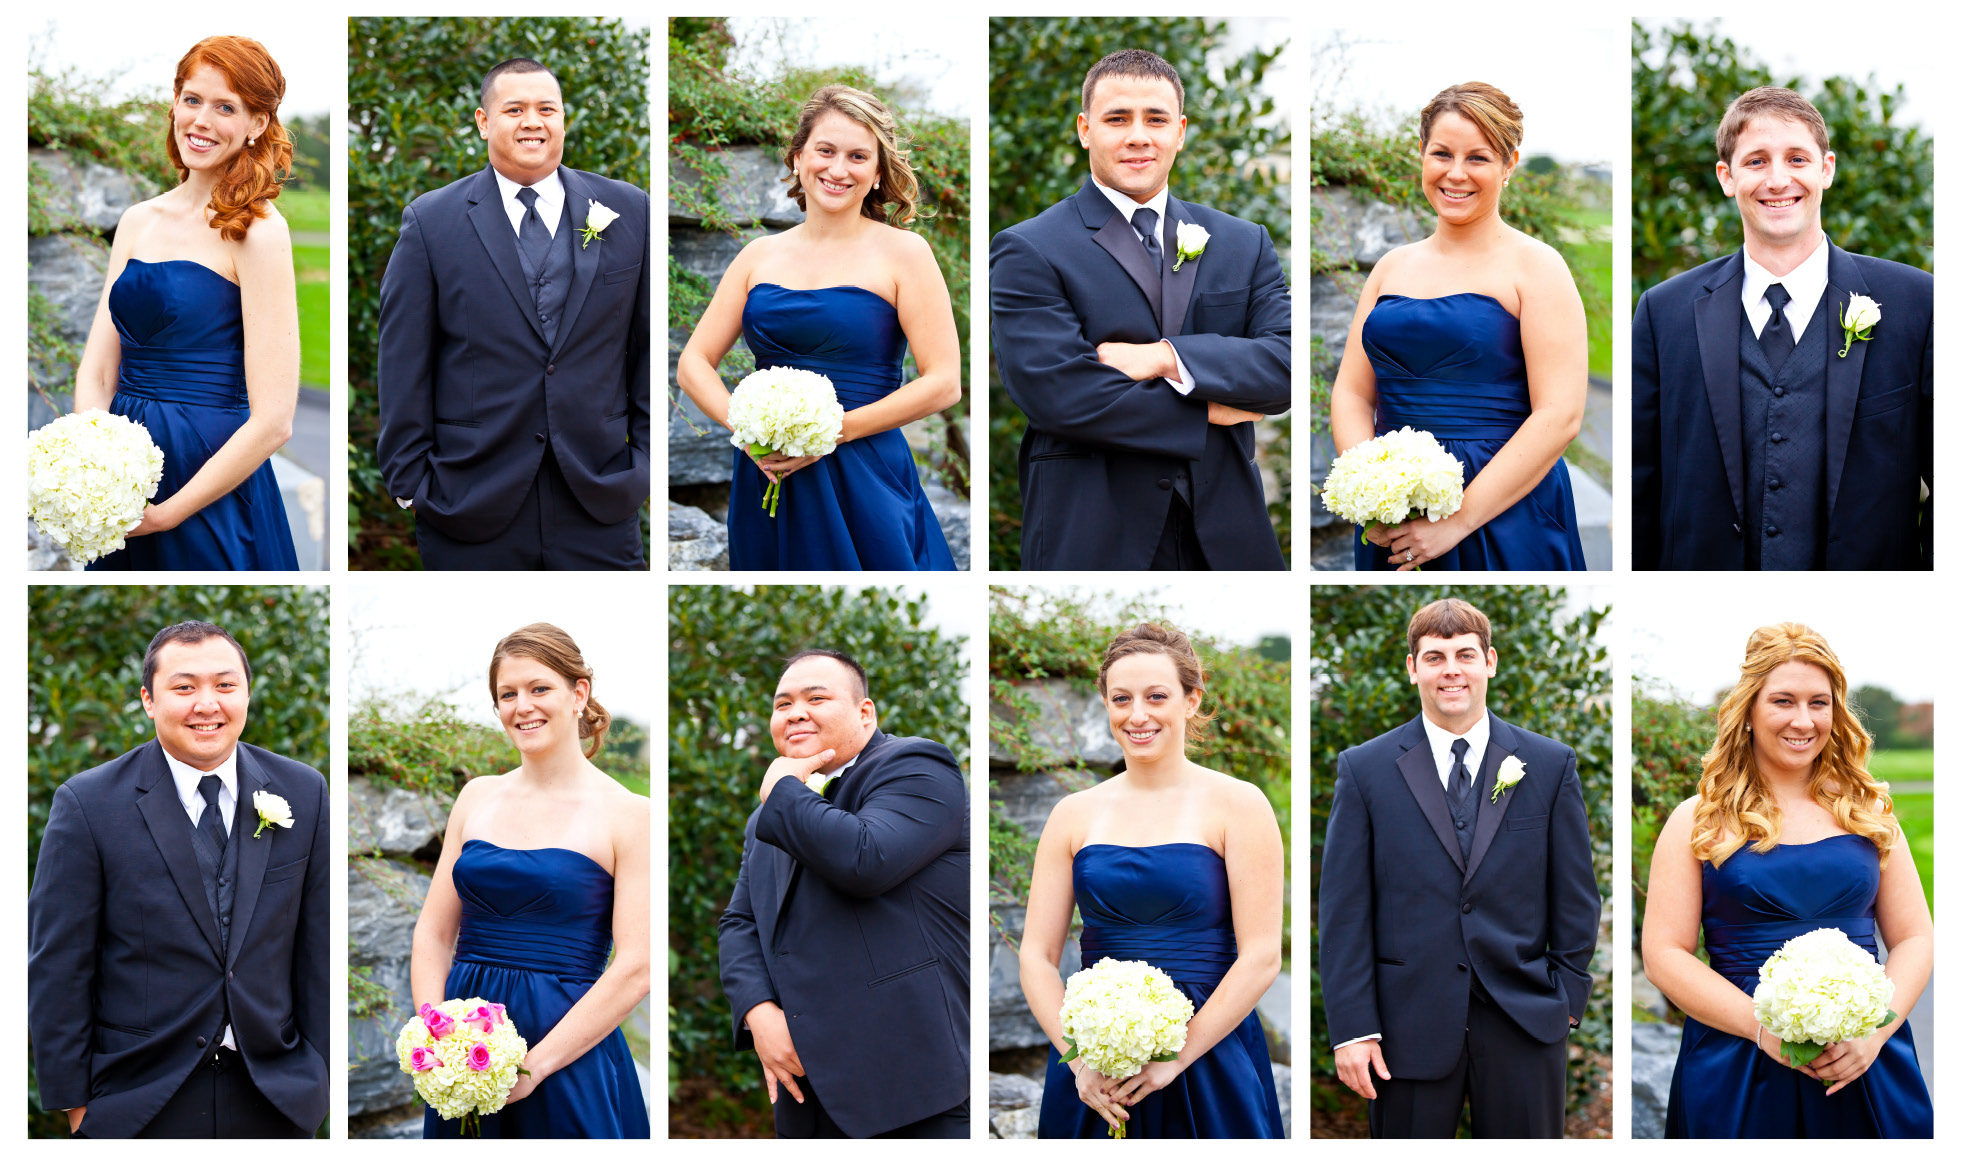 amie-bridal-party-of-122